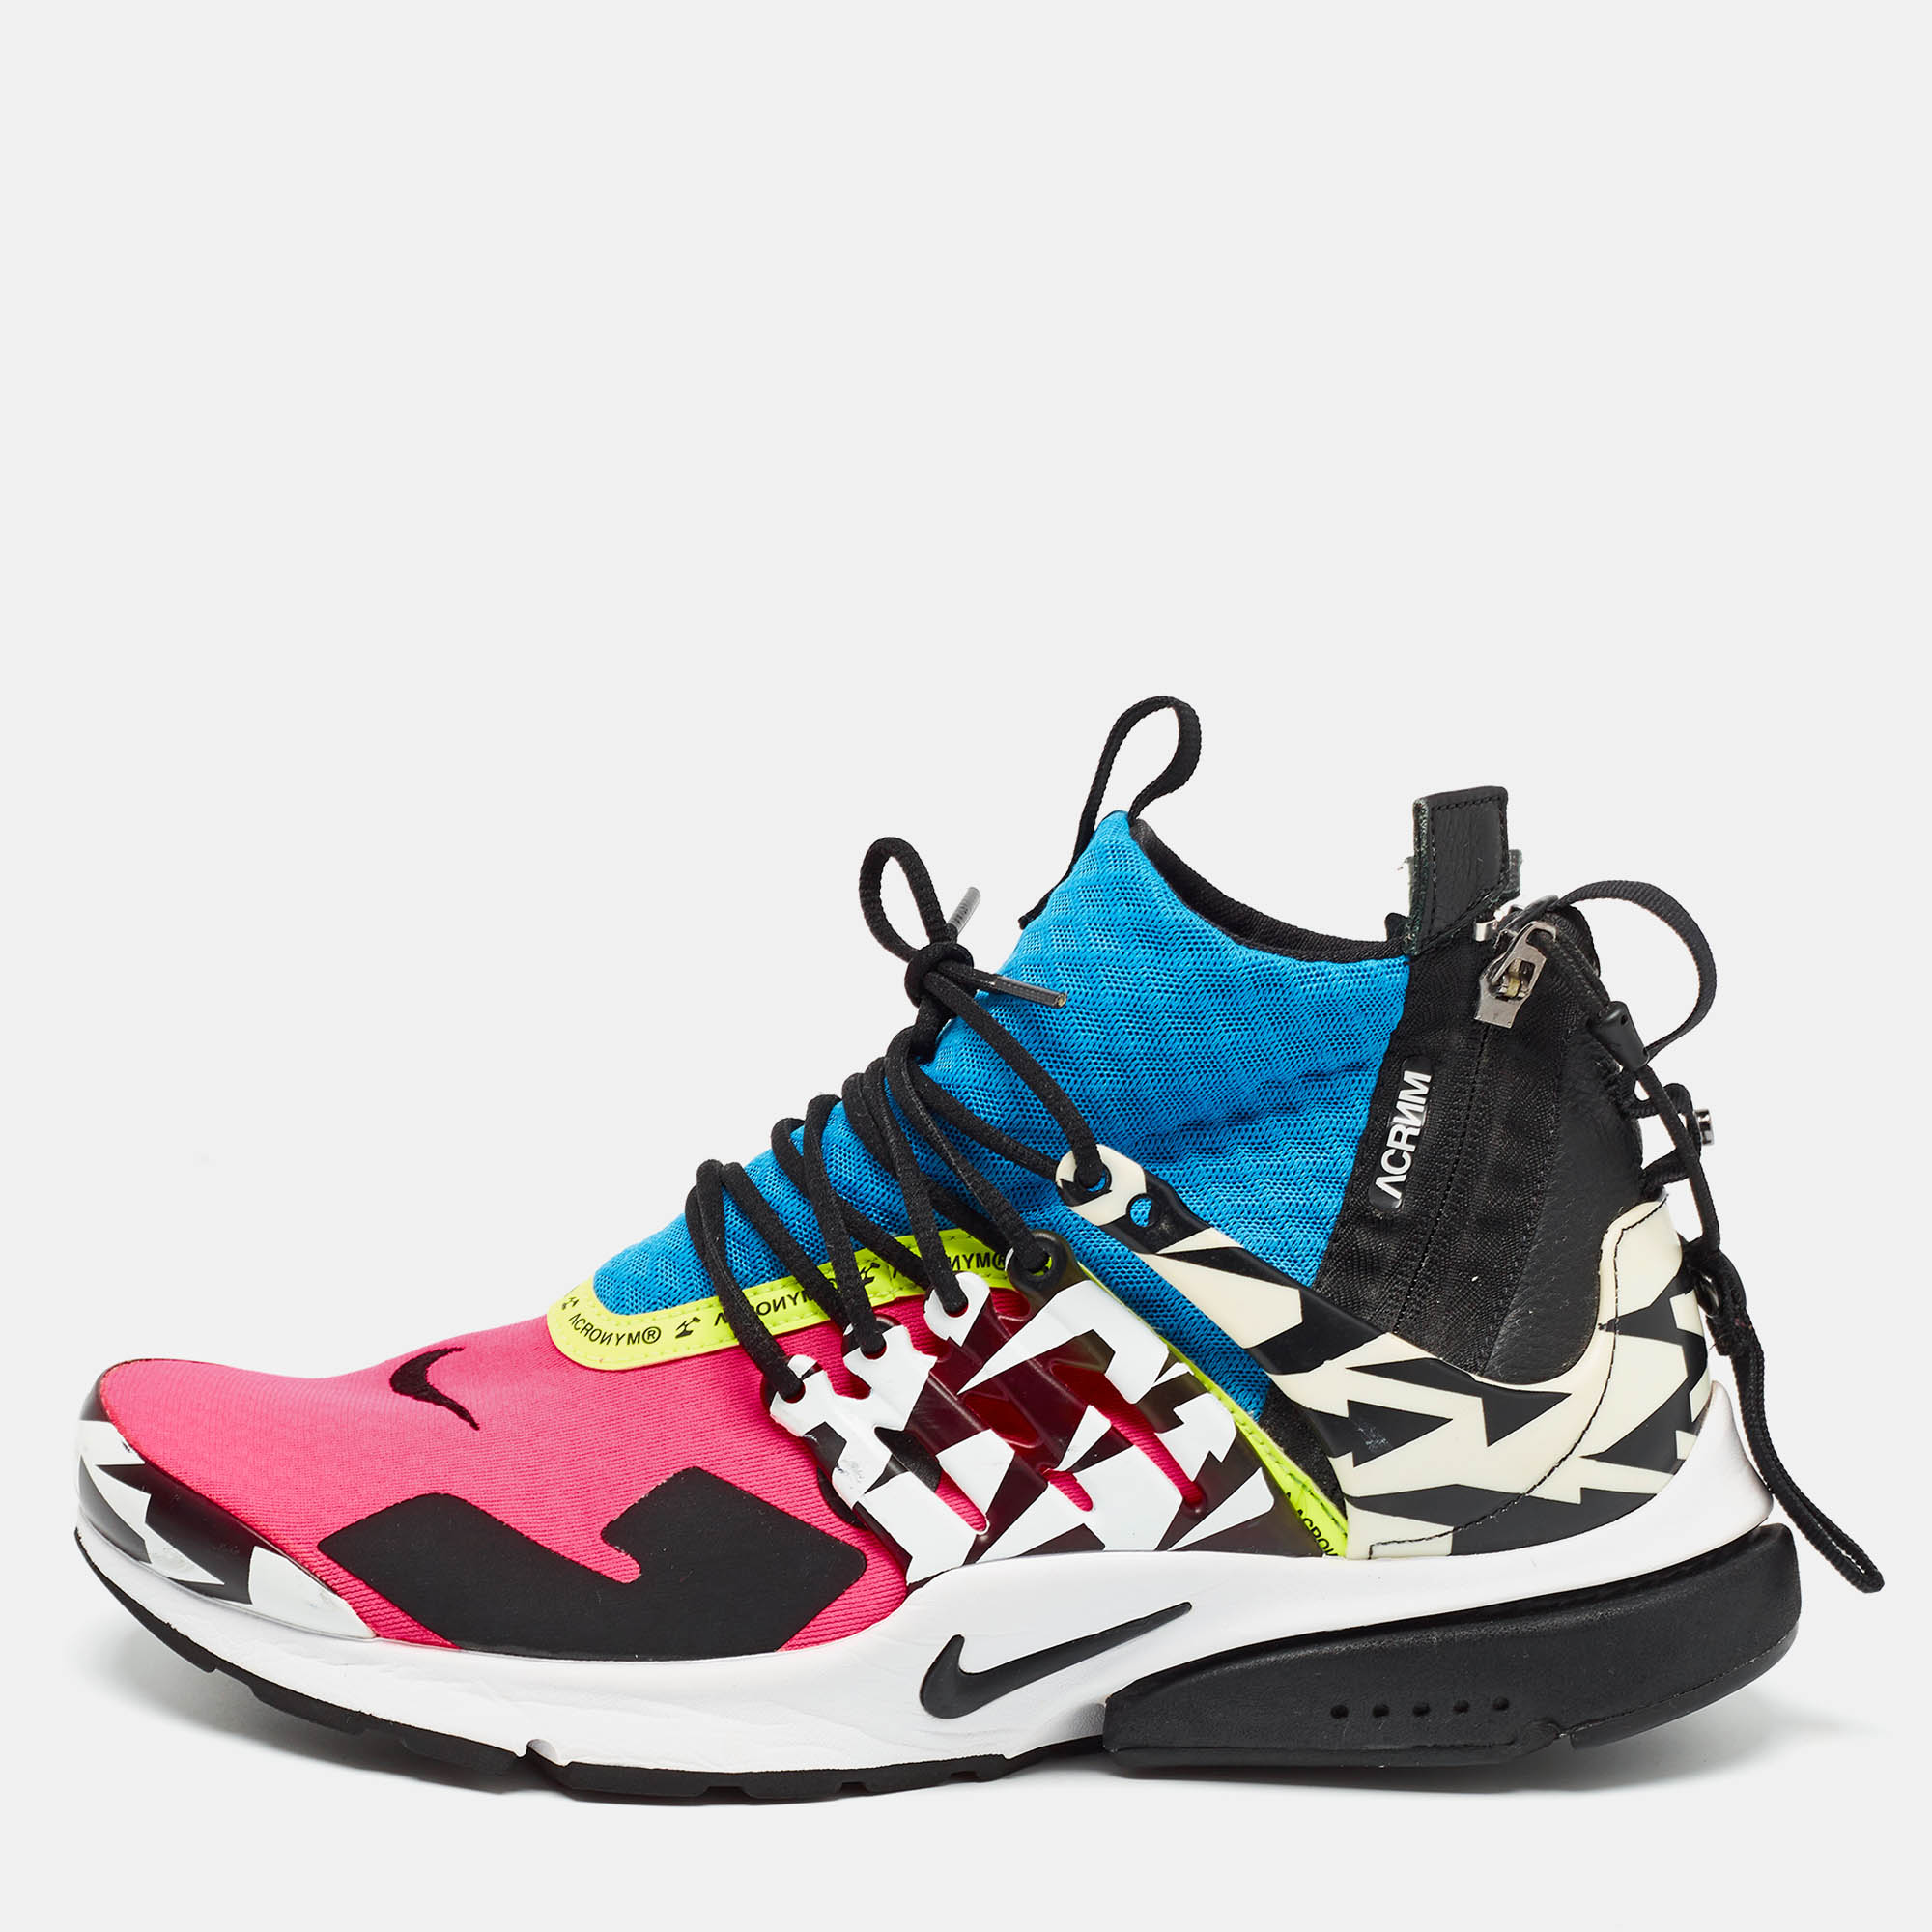 Pre-owned Nike Acronym X Air Presto Multicolor Fabric And Leather Mid Racer Sneakers Size 45